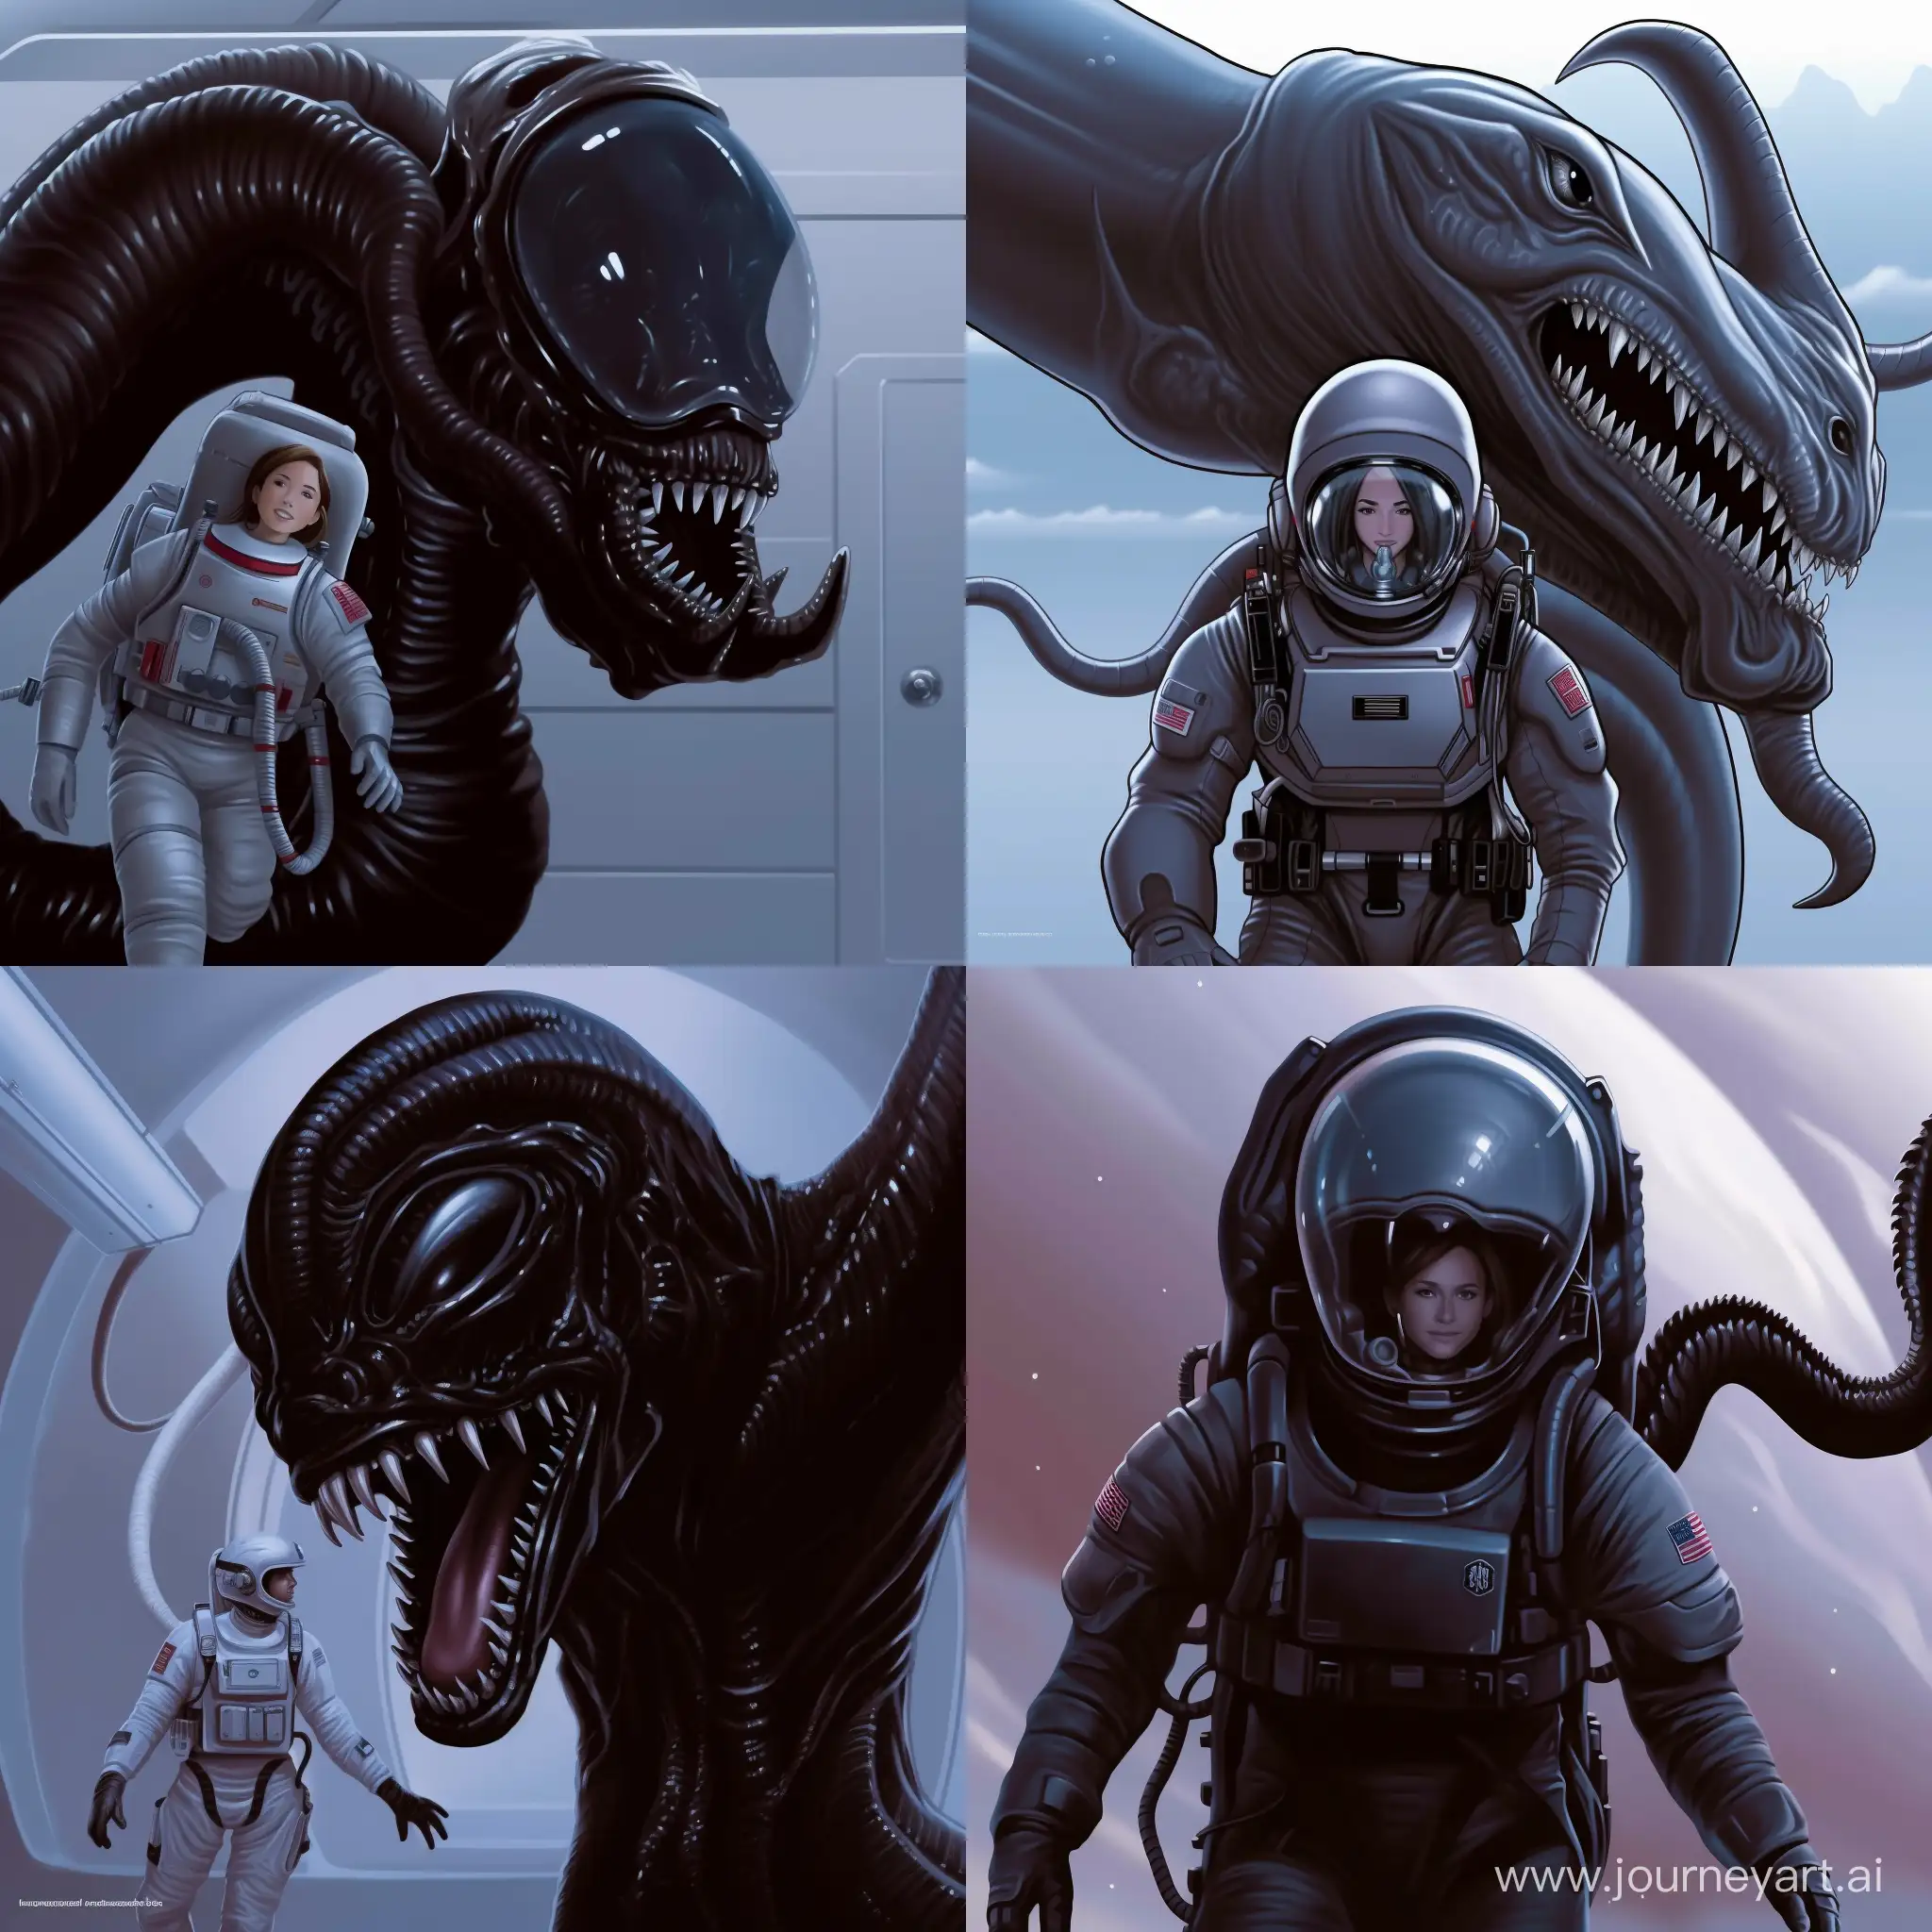 a girl climbs into a space suit, a large xenomorph from the movie "Alien" looks down on her, saliva flows from his open mouth.